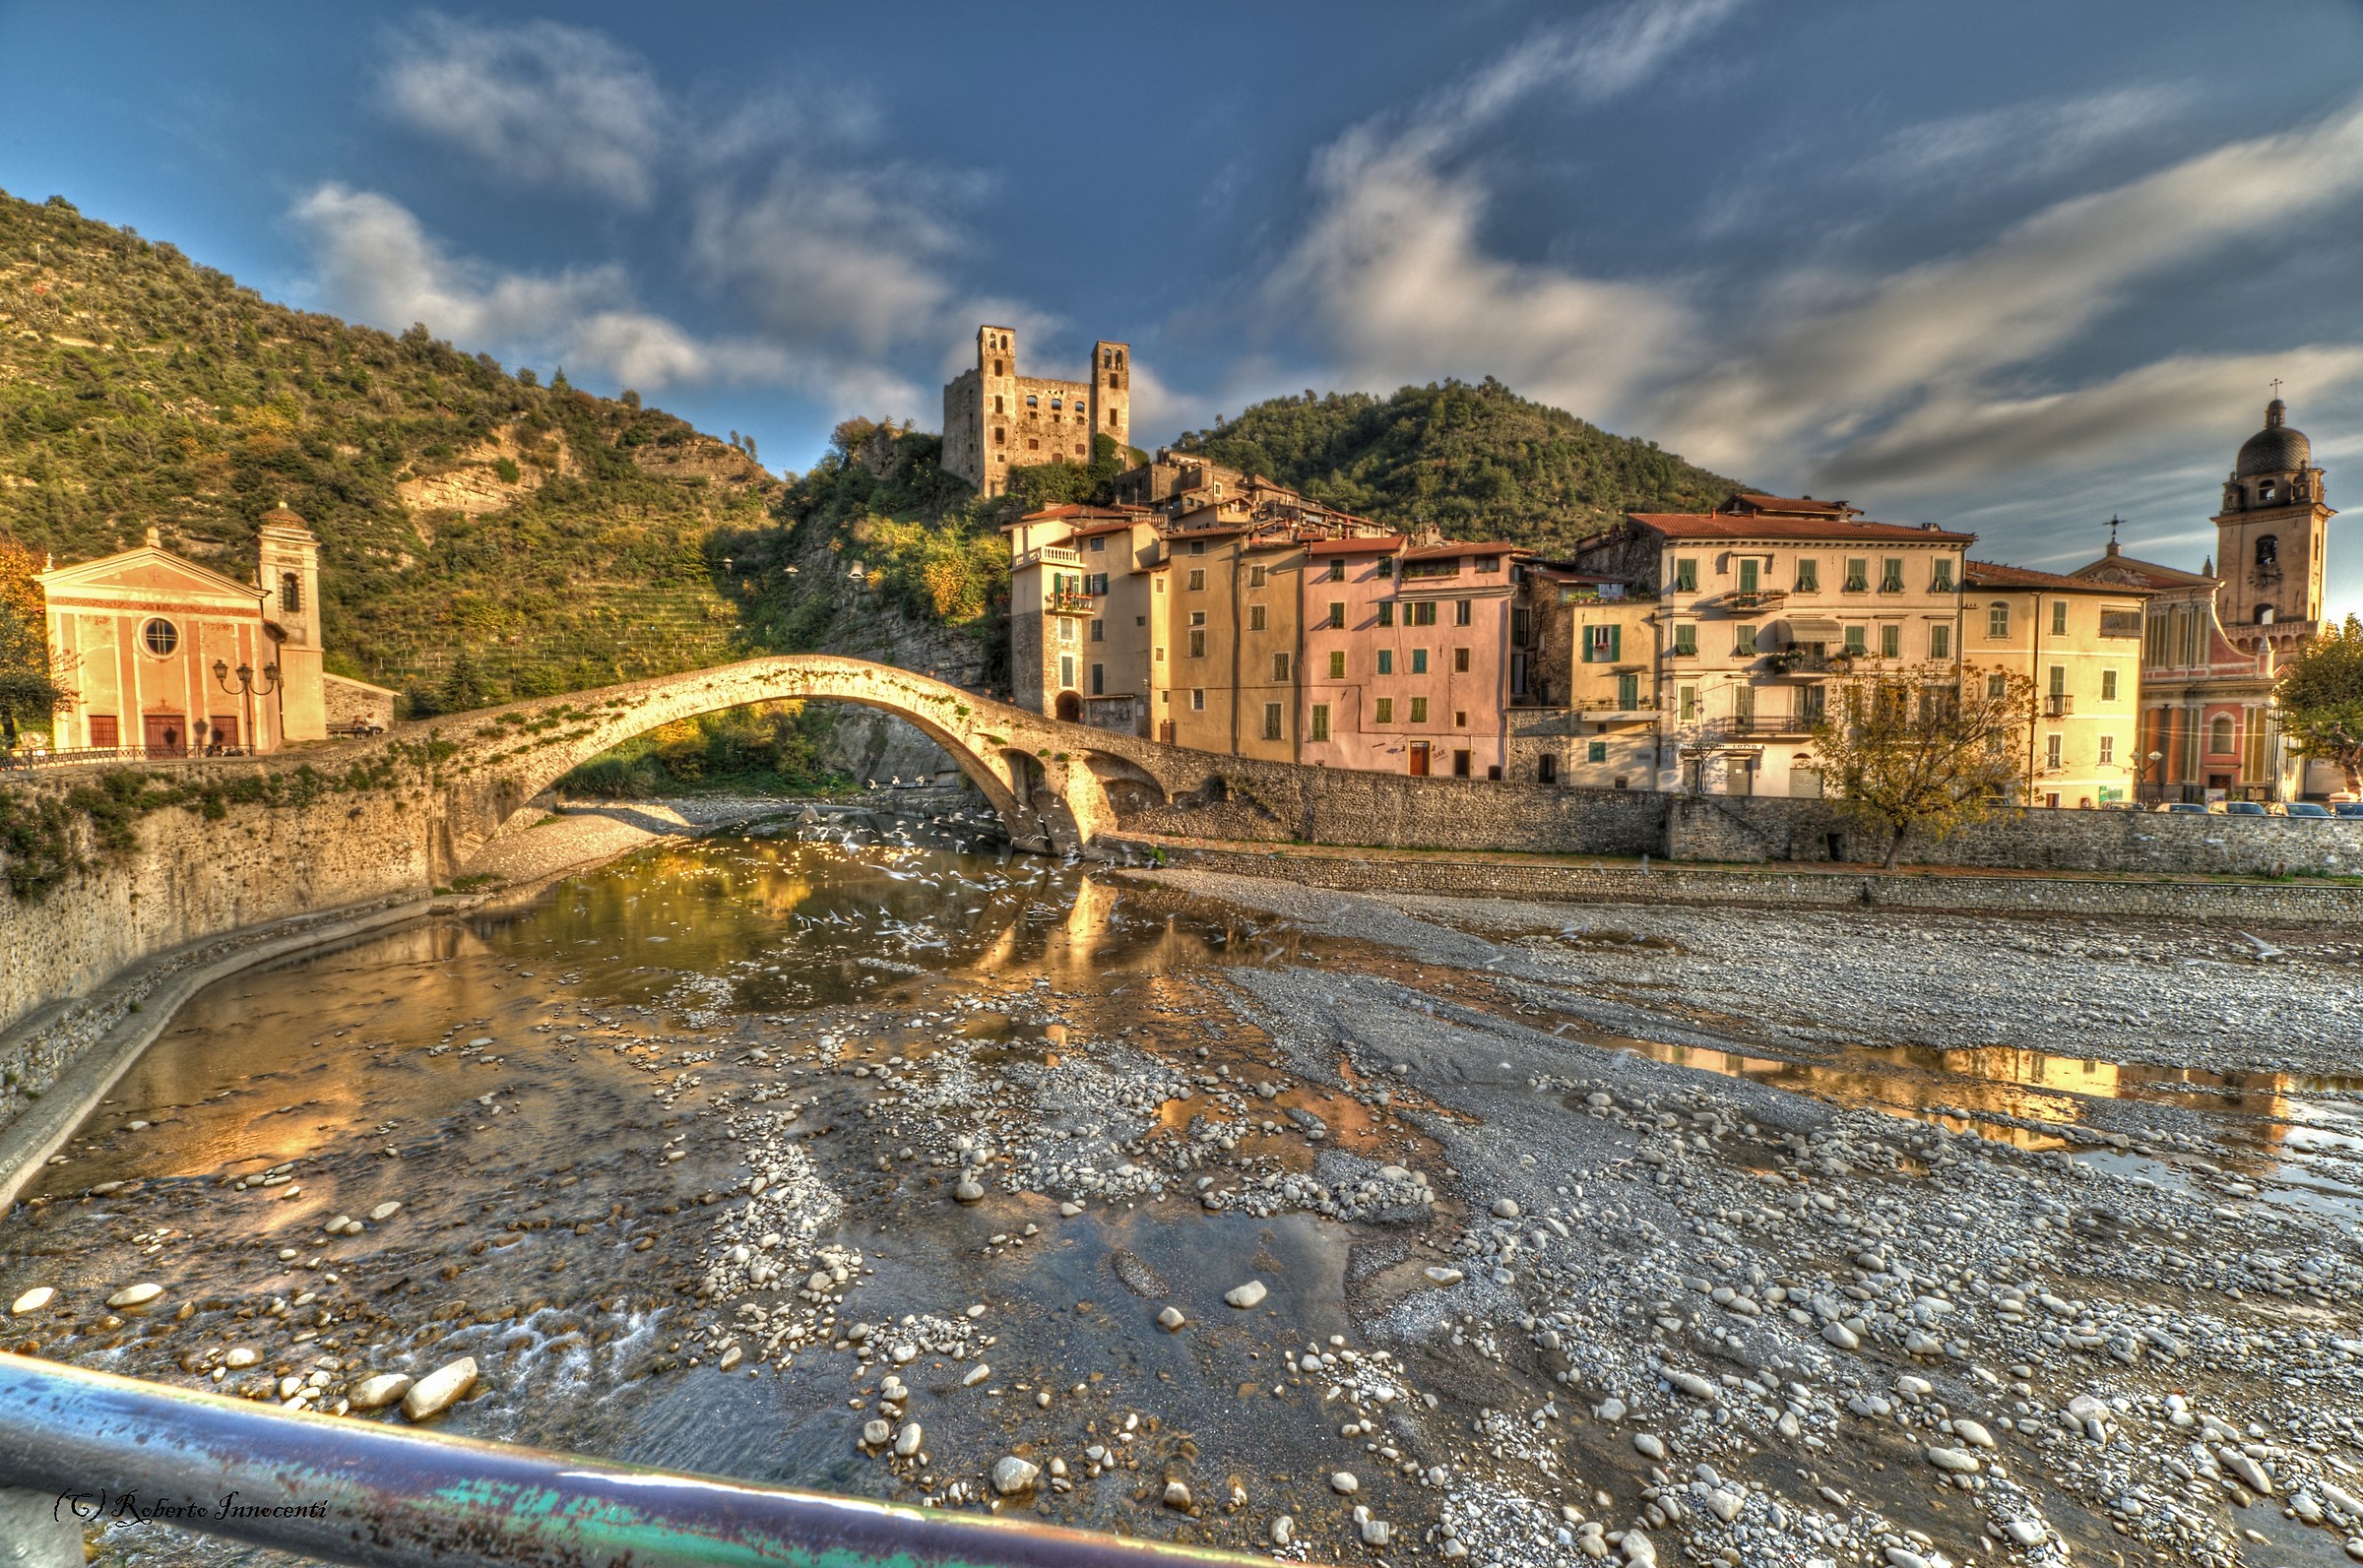 Greetings to all from Dolceacqua....